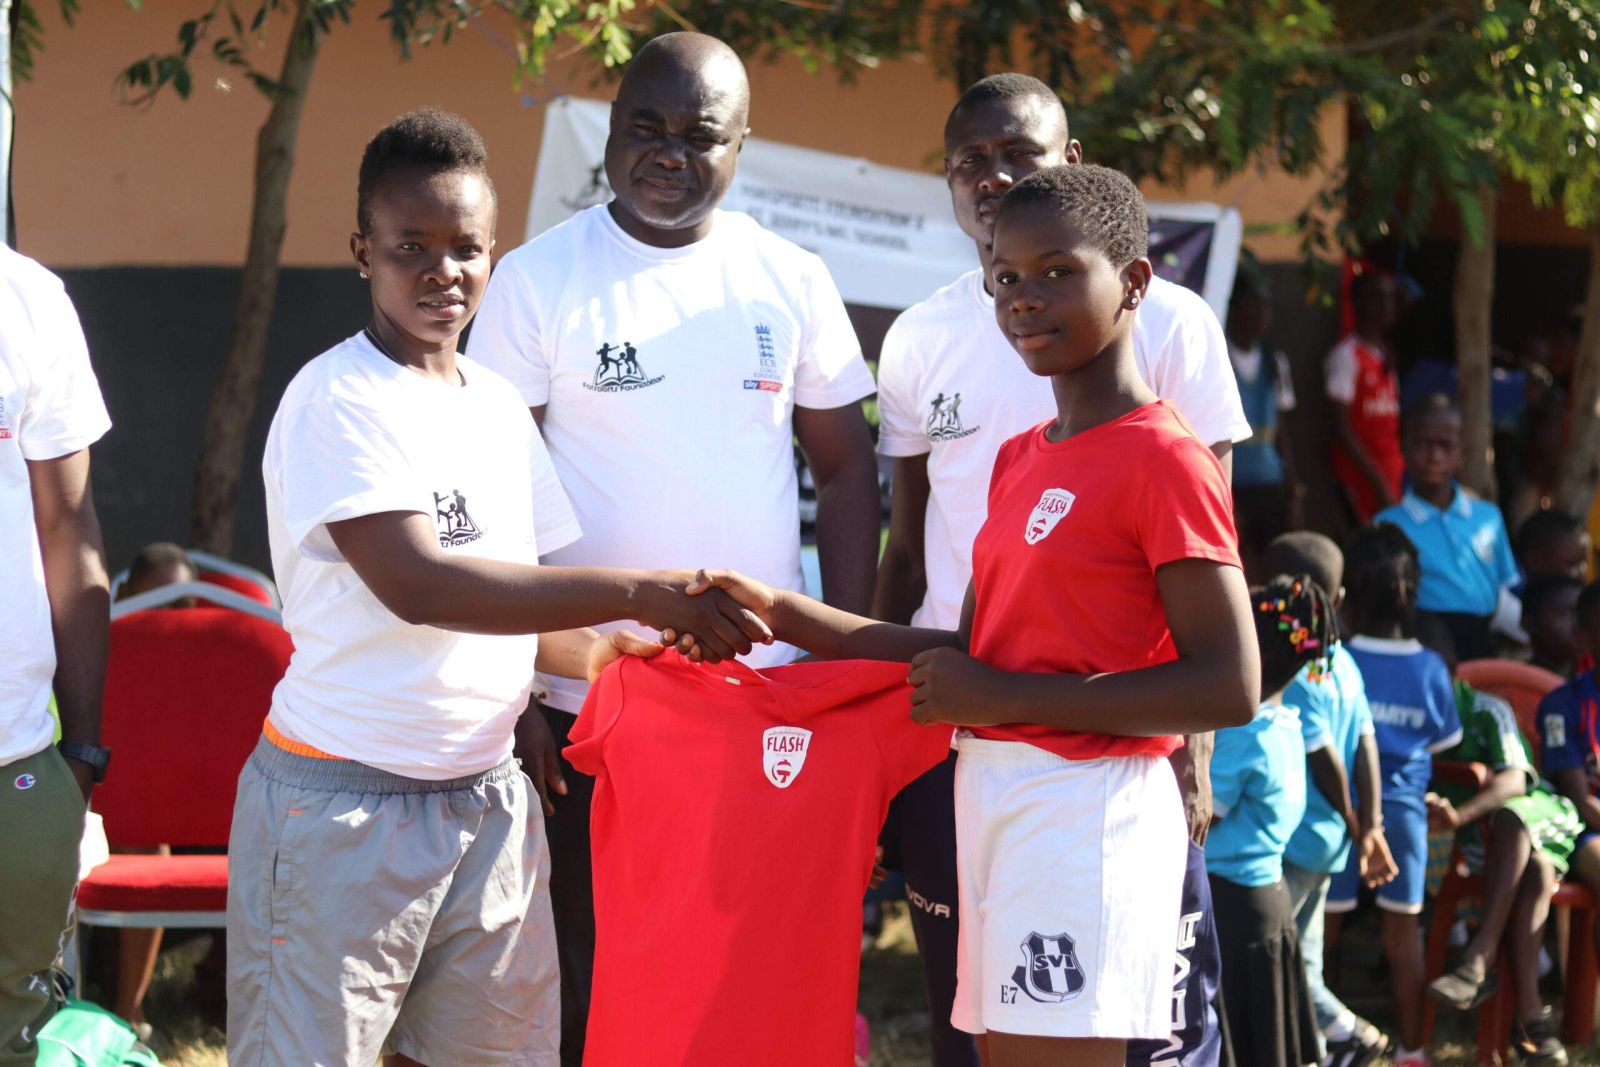 Football kit donation for Forsports Foundation from kits for the world 